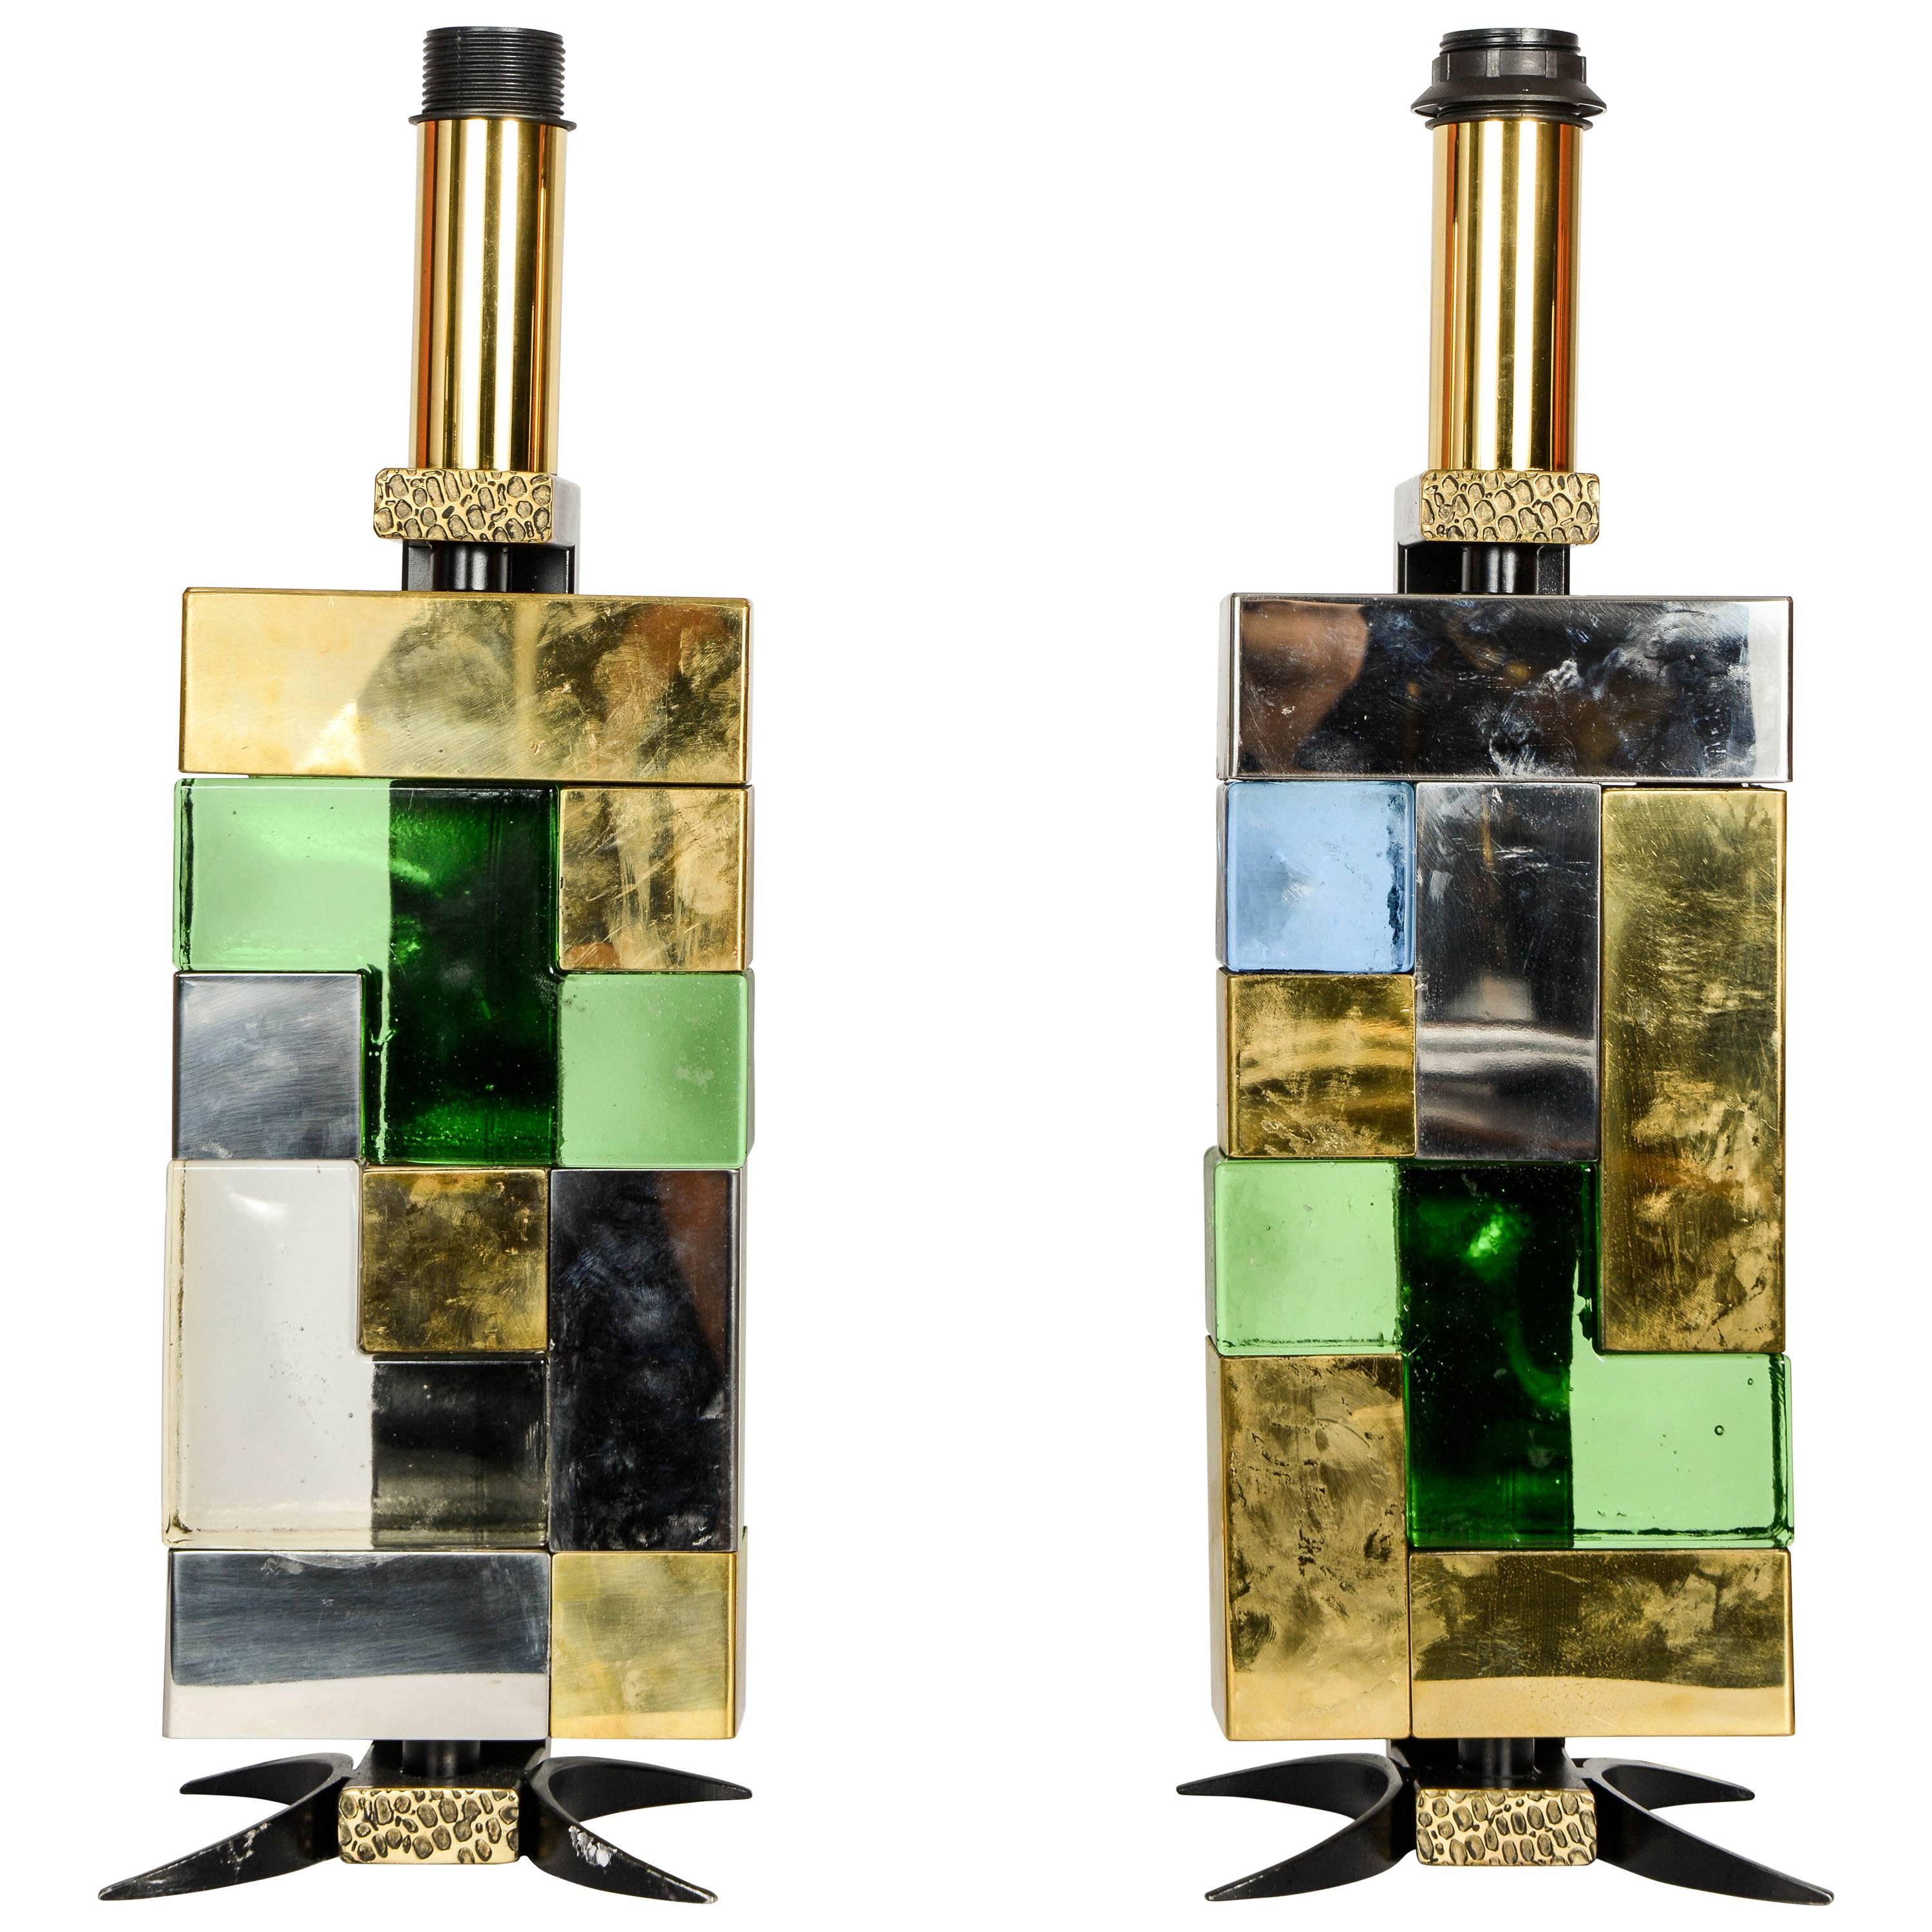 Pair of "Space Age" Lamps